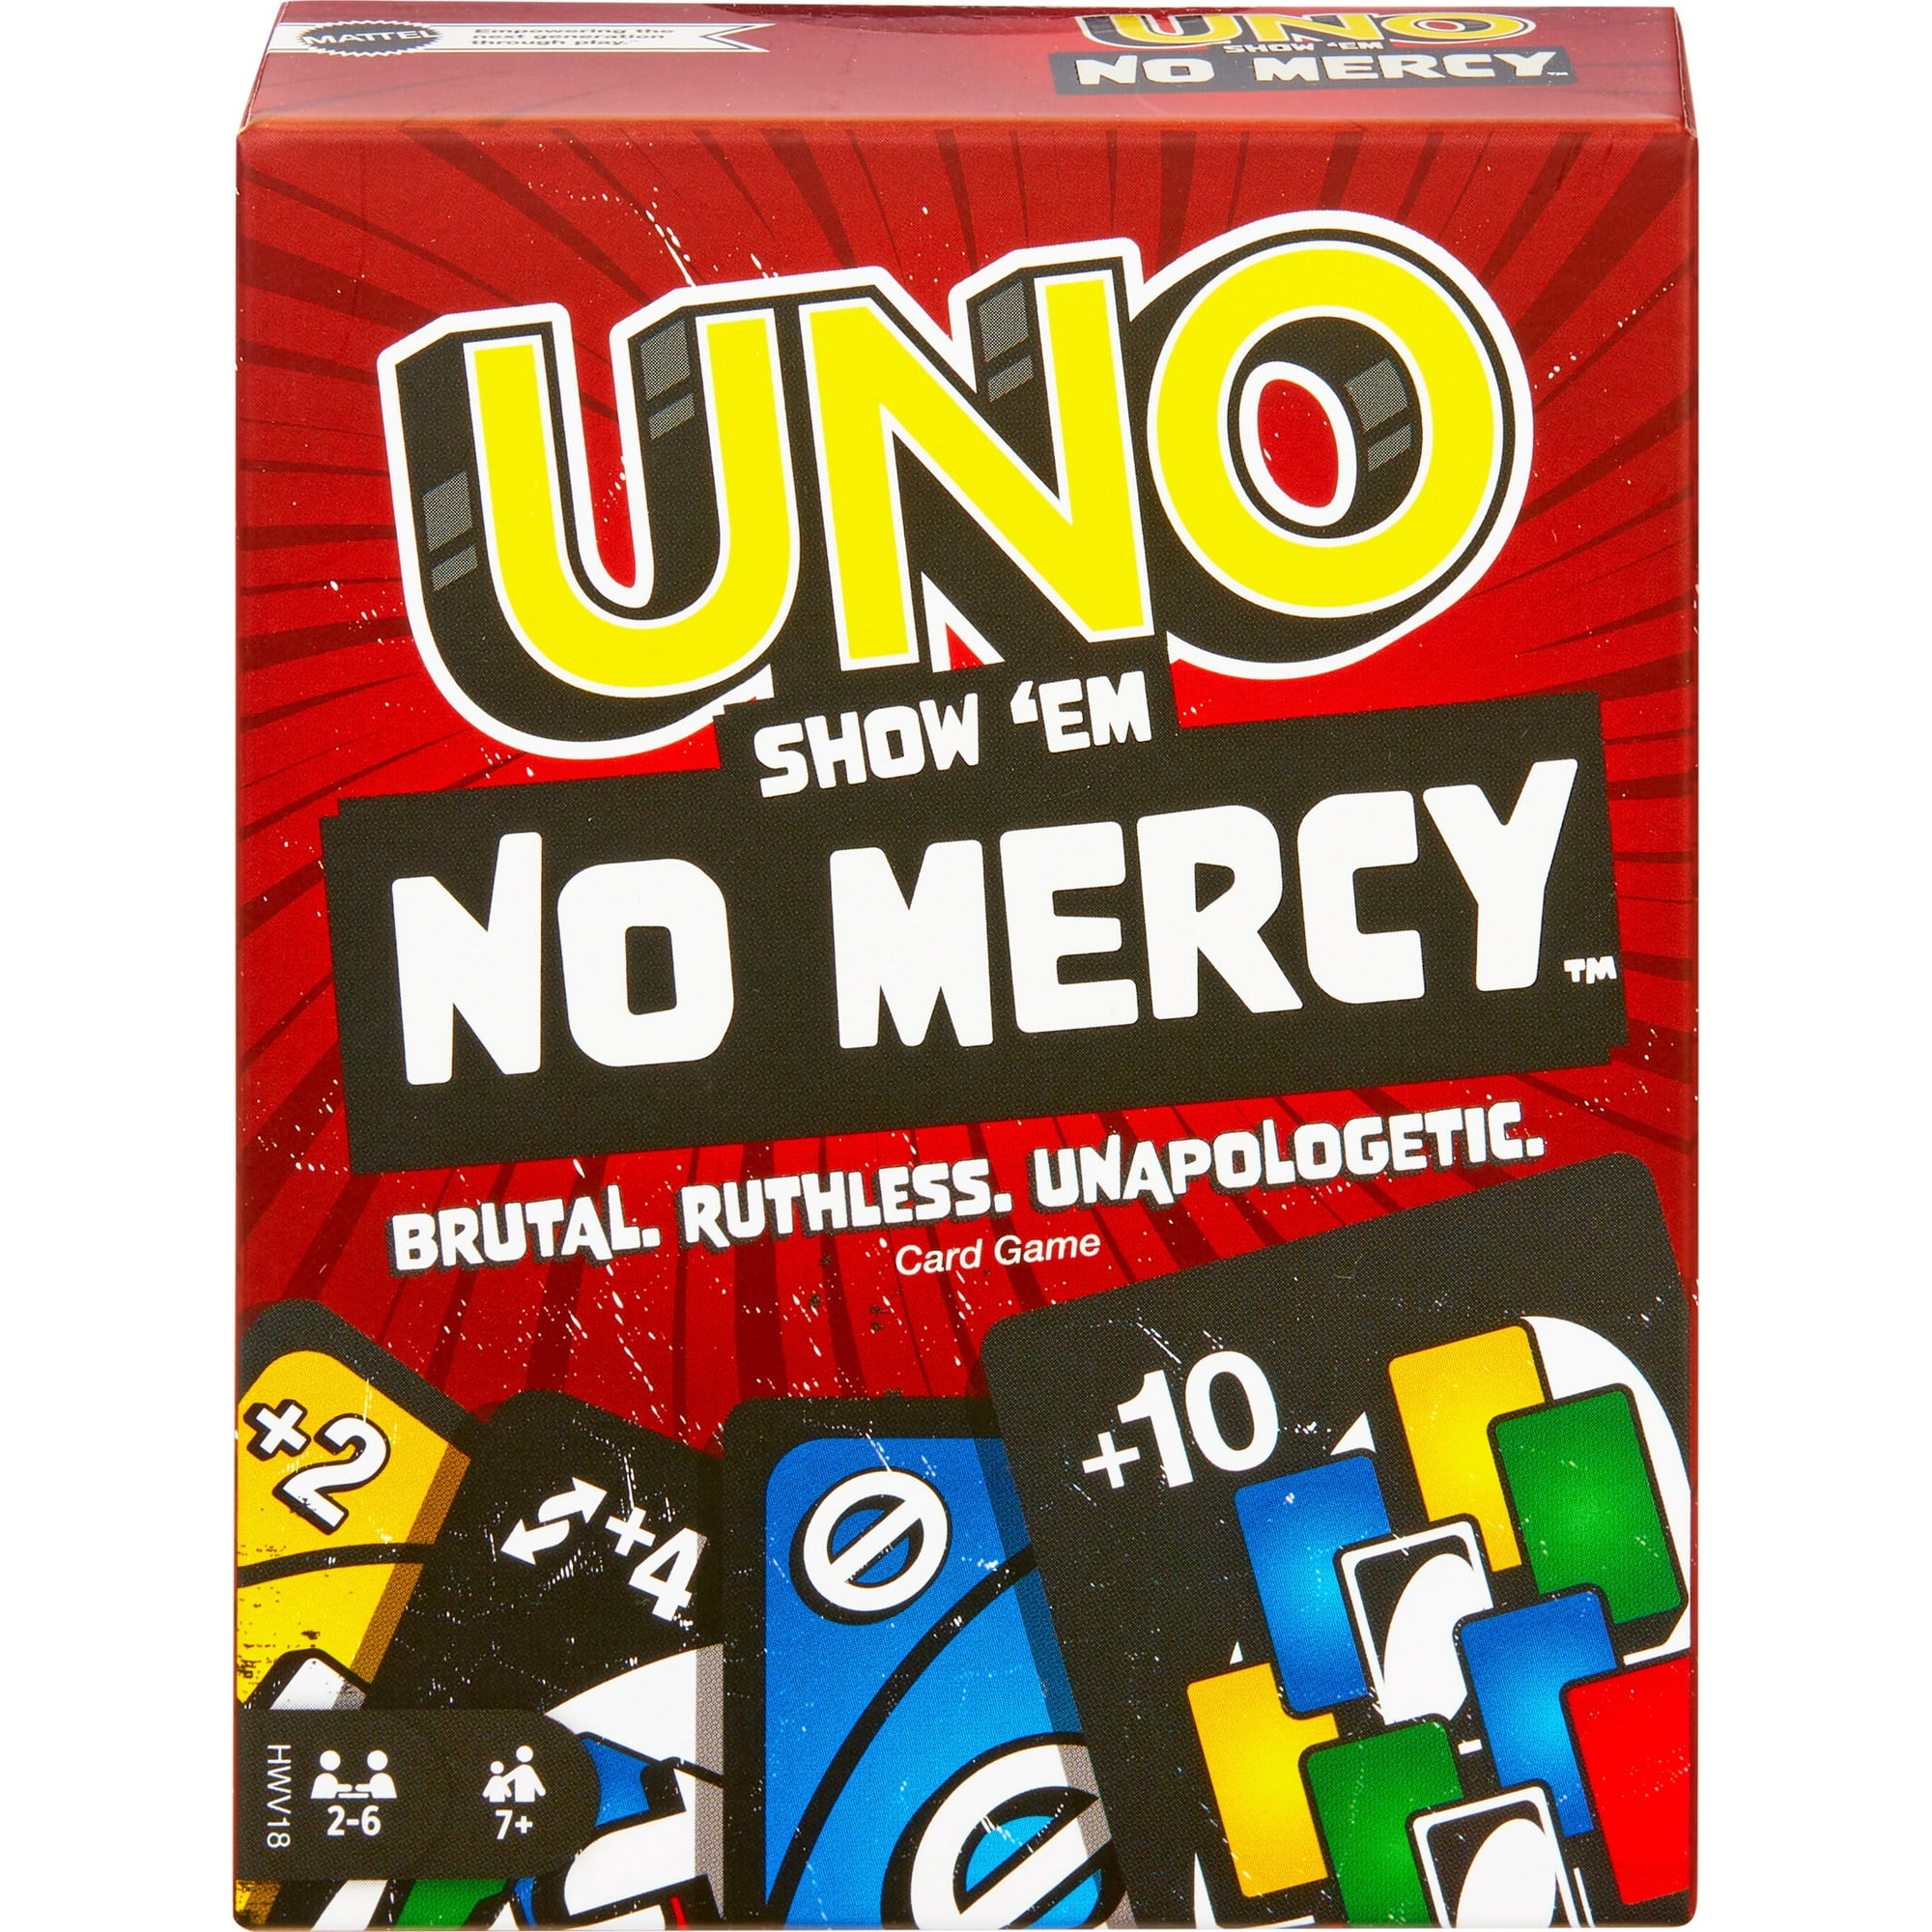 UNO FLIP, Family Card Game, with 112 Cards, Makes a Great Gift for 7 Year  Olds and Up